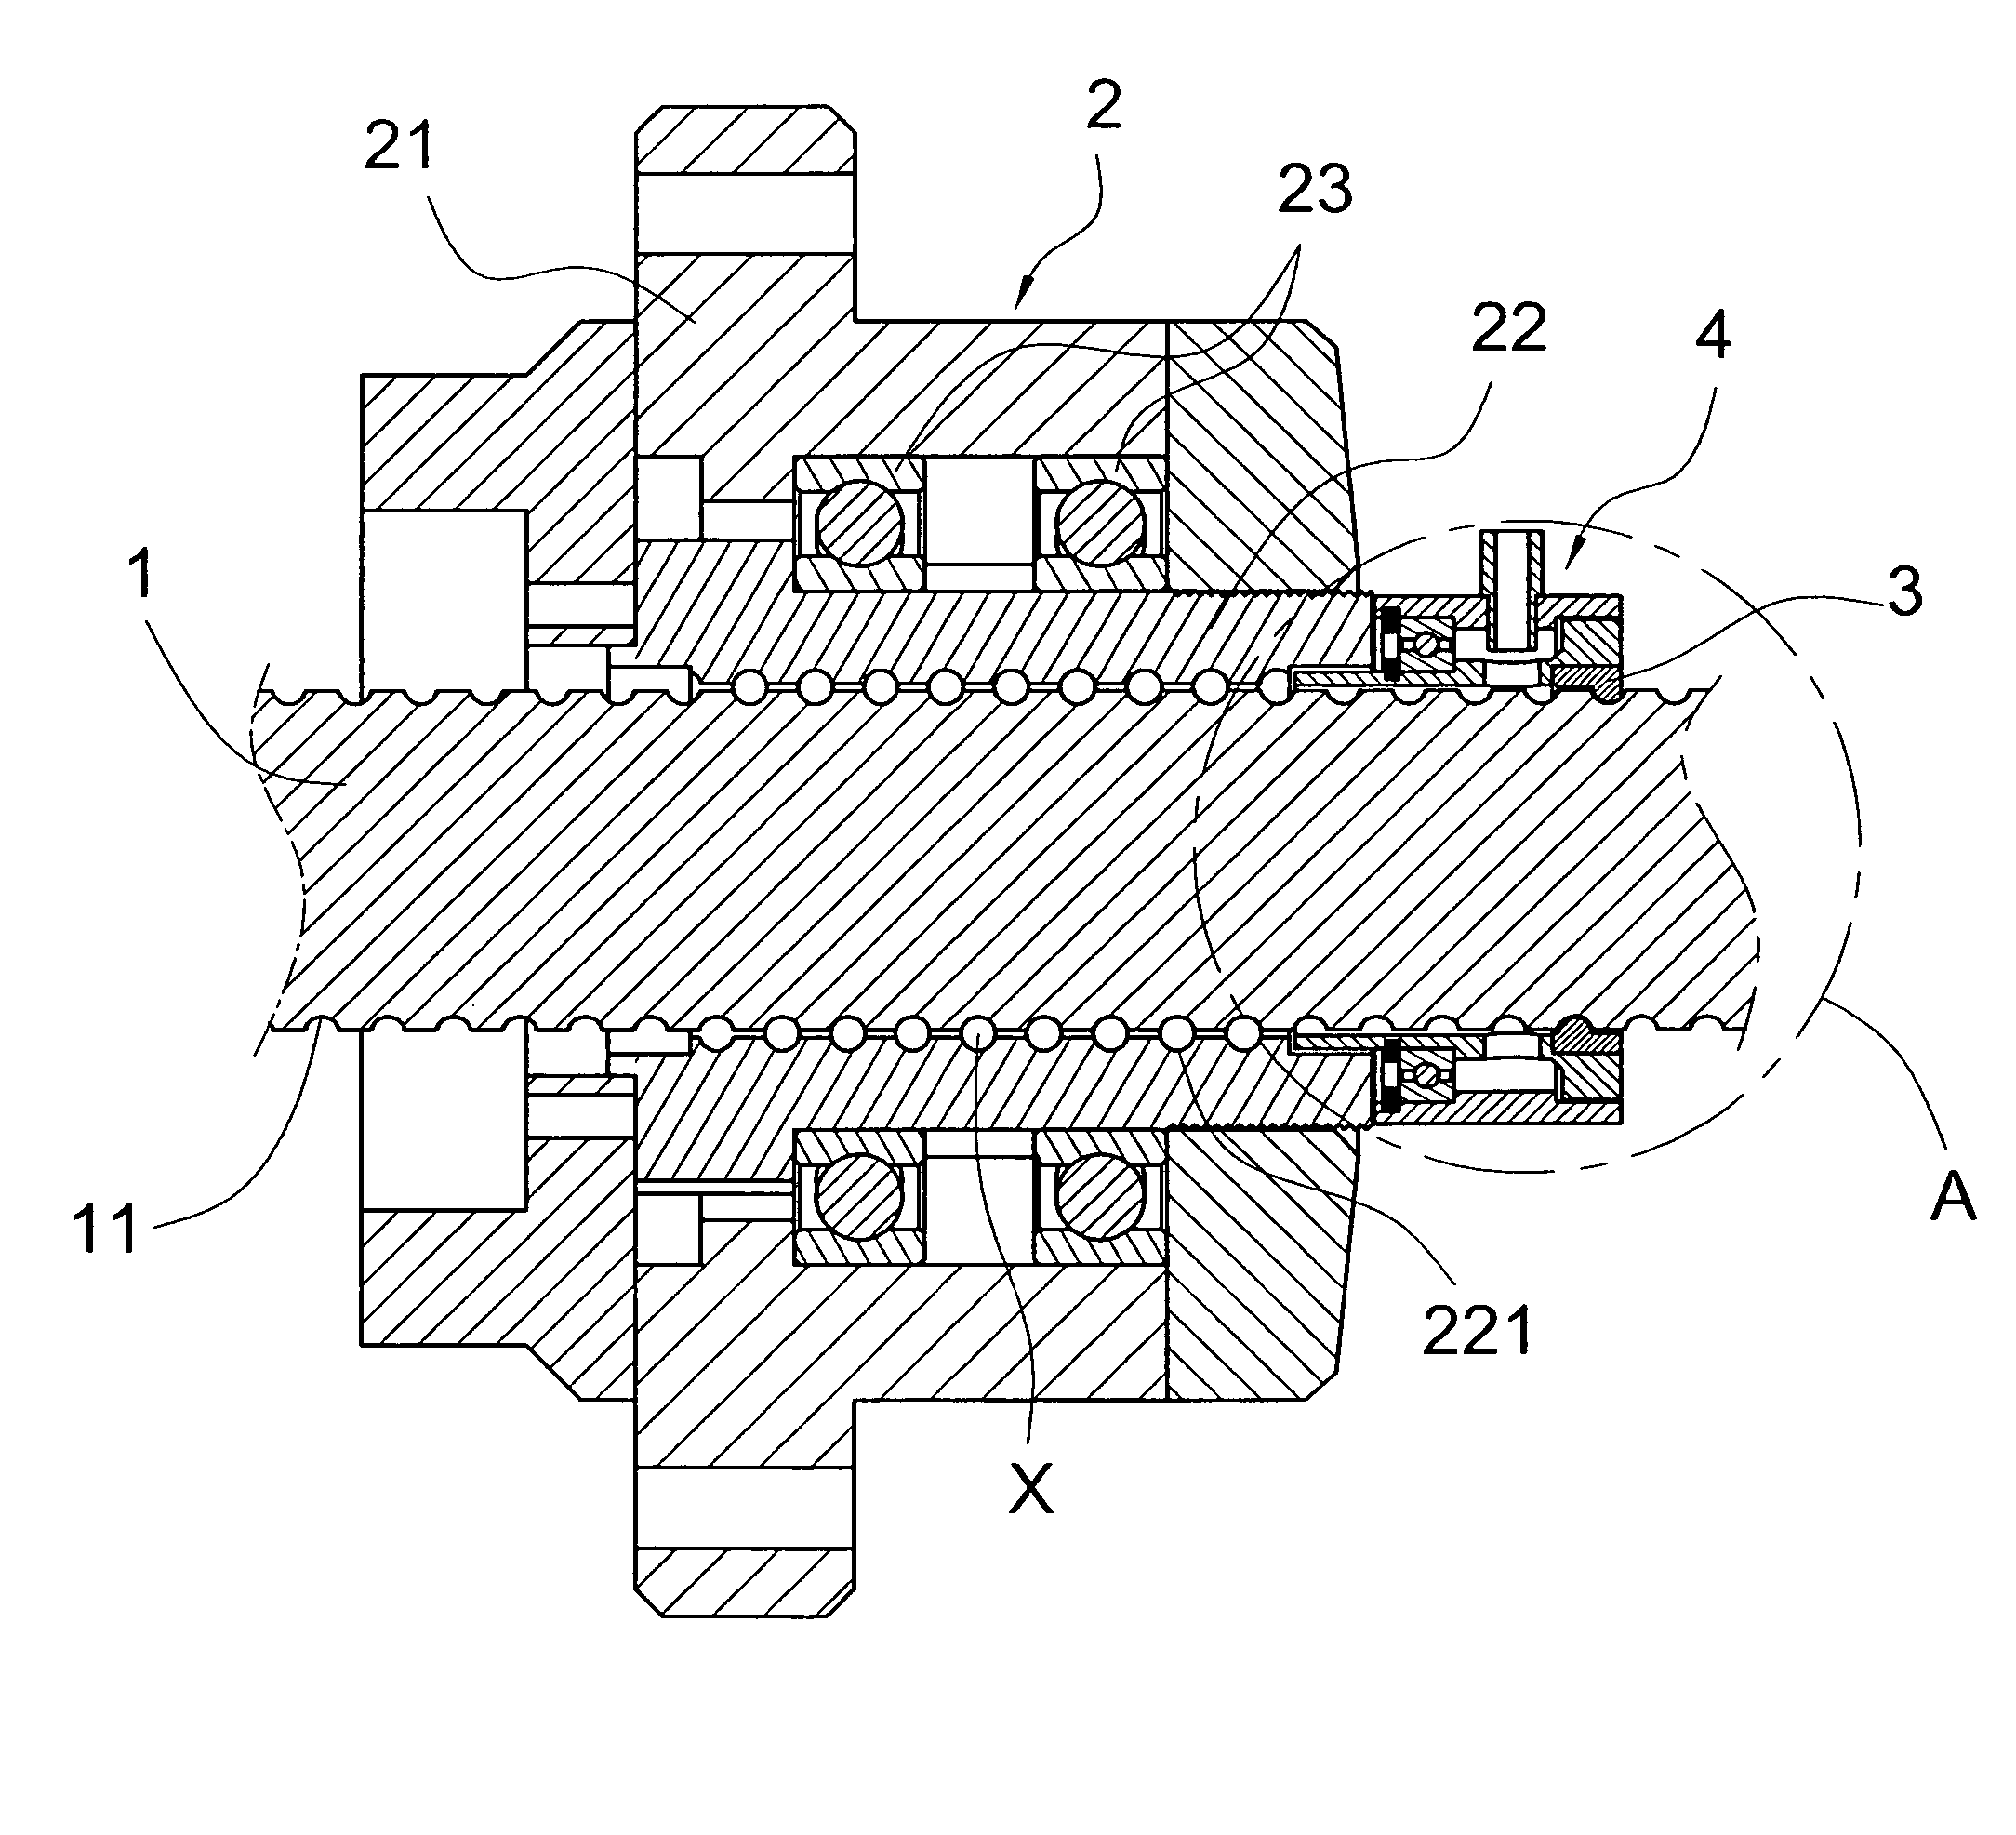 Rotating nut ball screw unit with lubricating arrangement